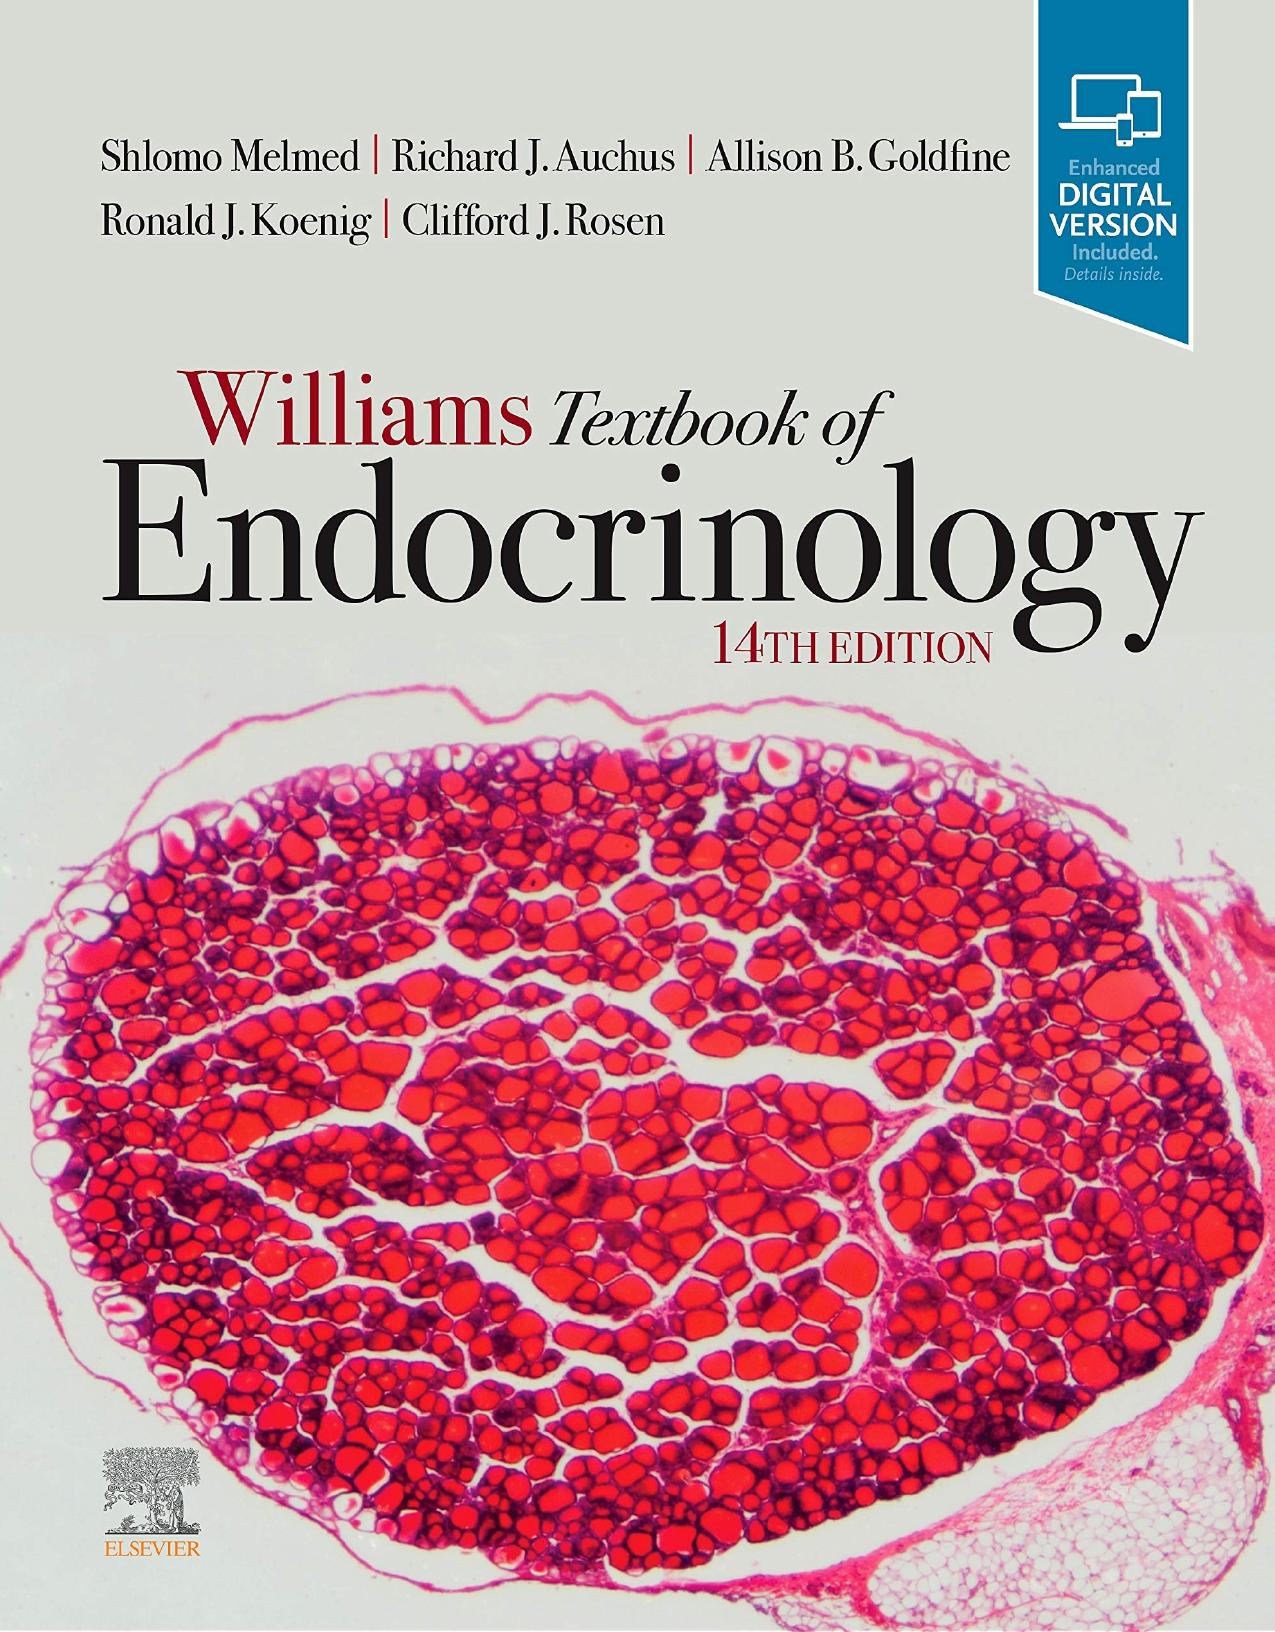 WILLIAMS TEXTBOOK OF ENDOCRINOLOGY, 2020